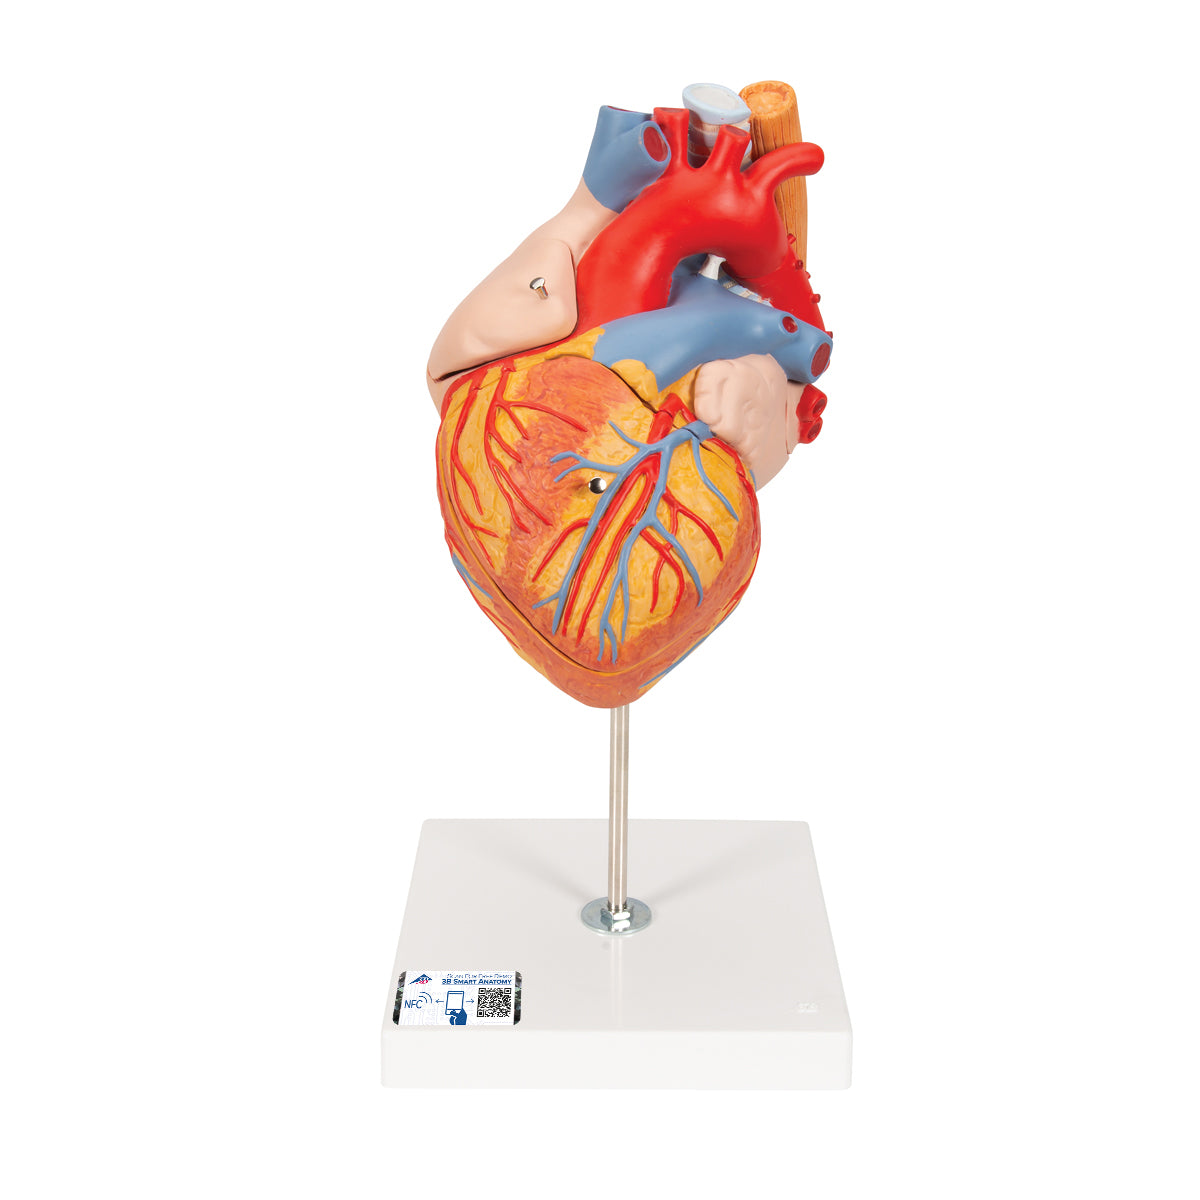 Enlarged and hand-painted heart model with trachea and esophagus